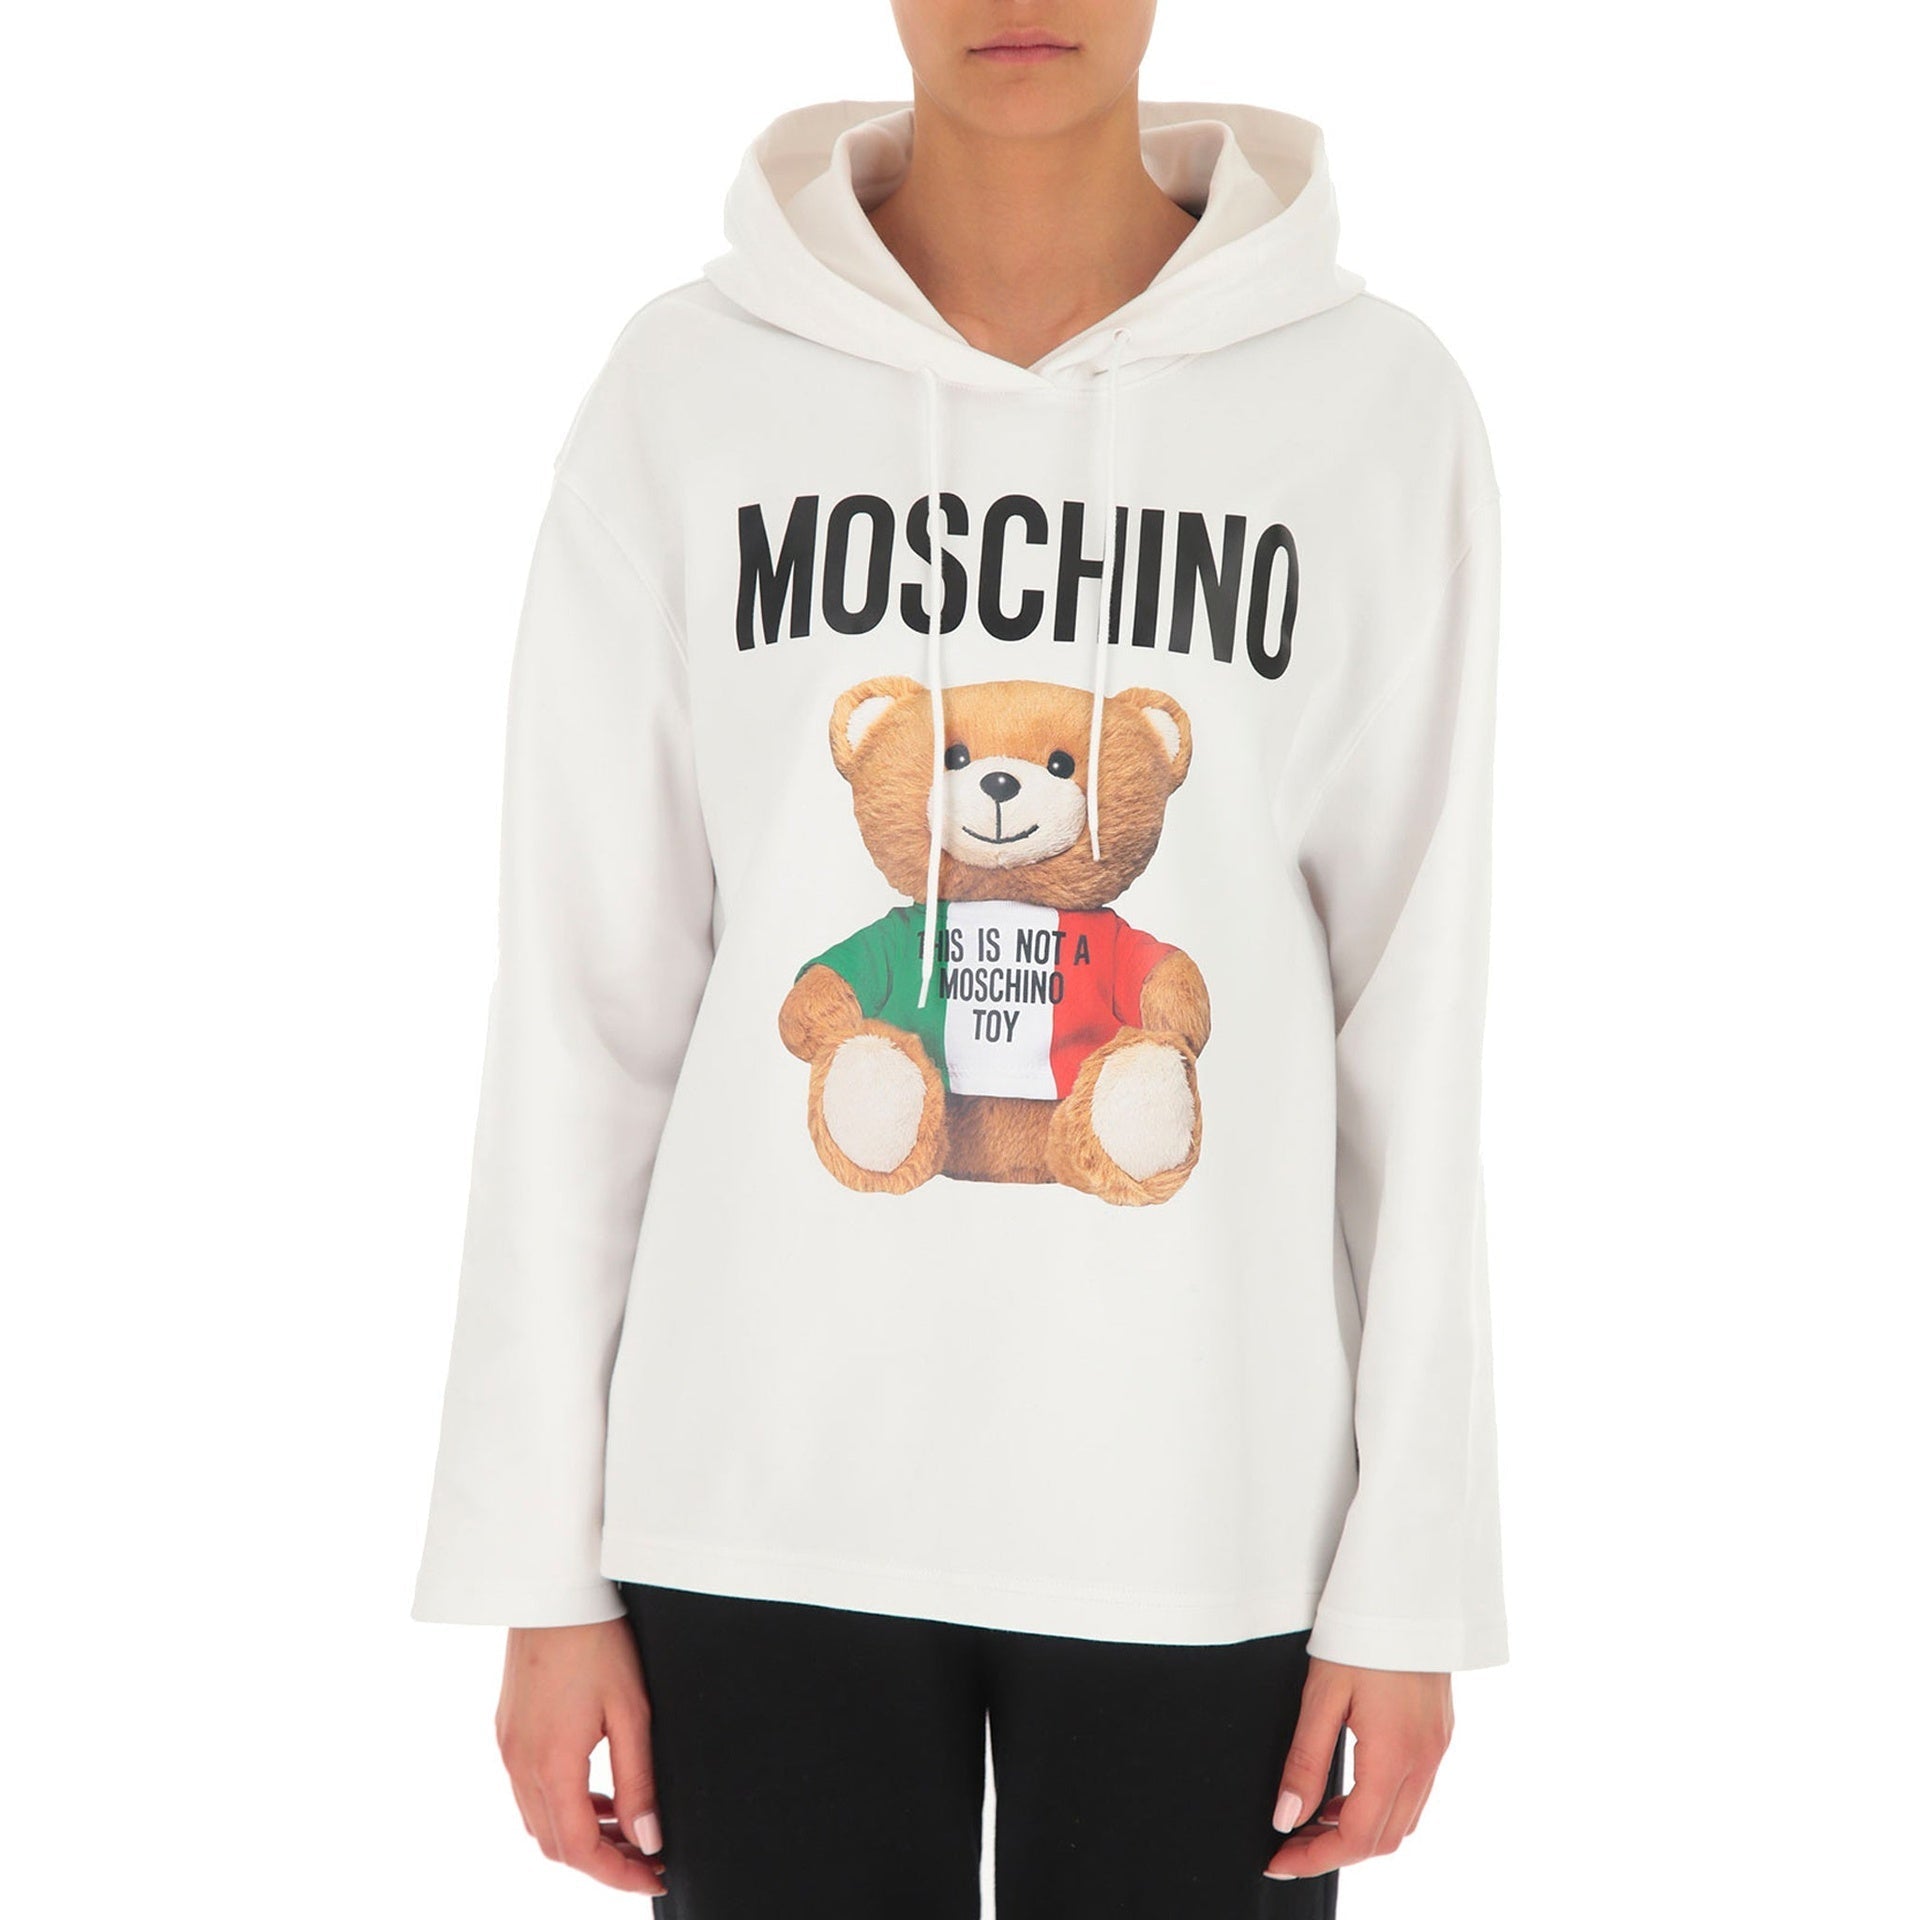 MOSCHINO-COUTURE-OUTLET-SALE-Moschino-Couture-Logo-Hooded-Sweatshirt-Shirts-WHITE-42-ARCHIVE-COLLECTION-2.jpg